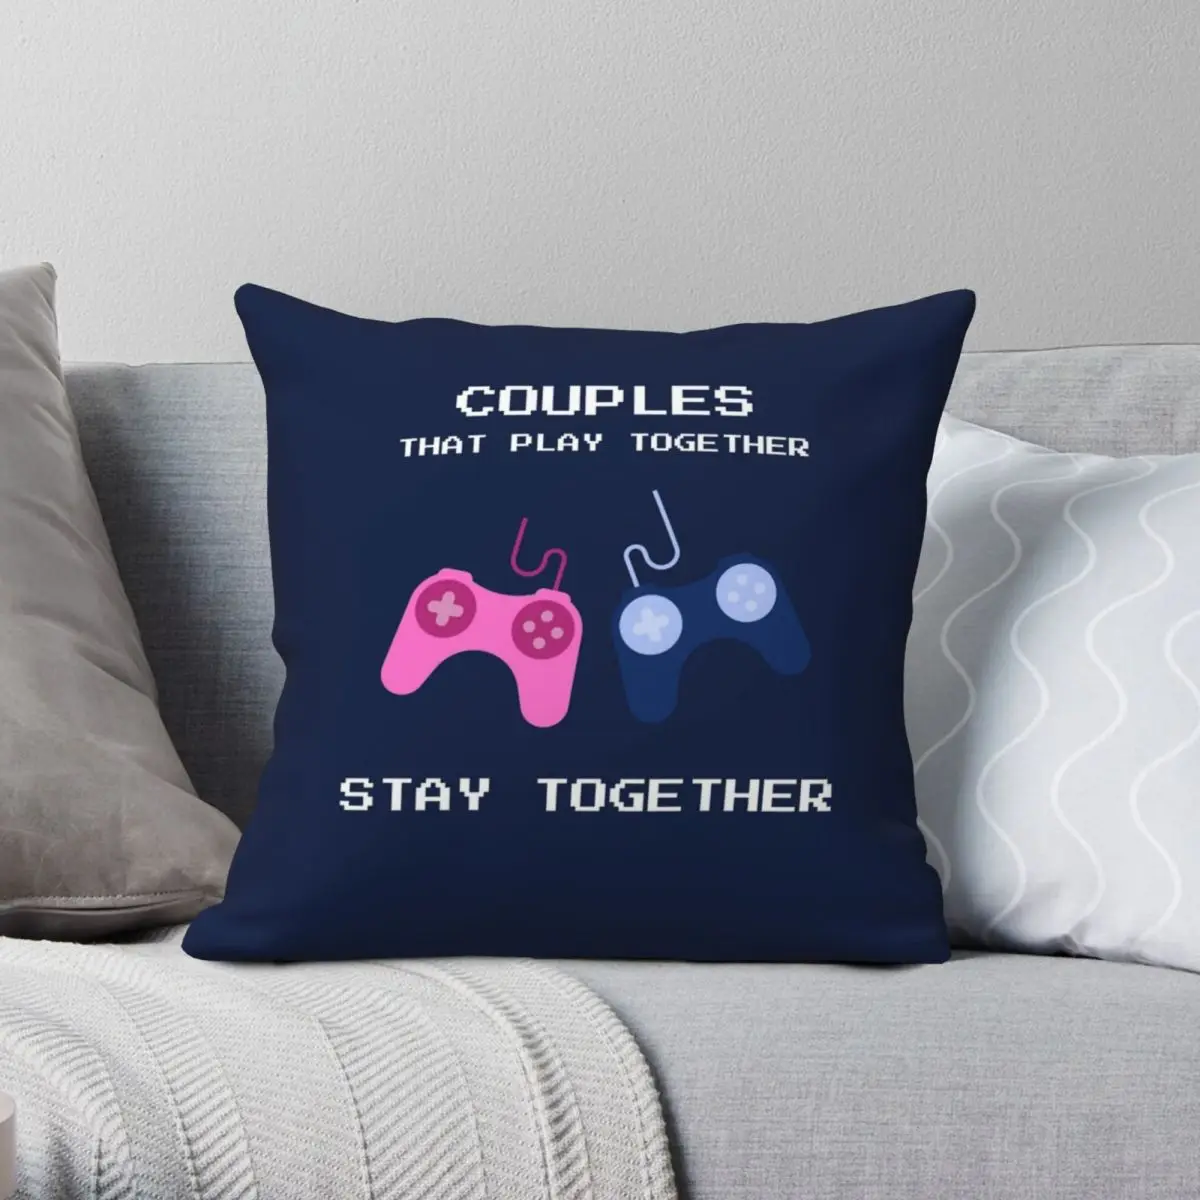 

Couples That Play Together Square Pillowcase Polyester Linen Velvet Printed Zip Decor Pillow Case Car Cushion Cover Wholesale